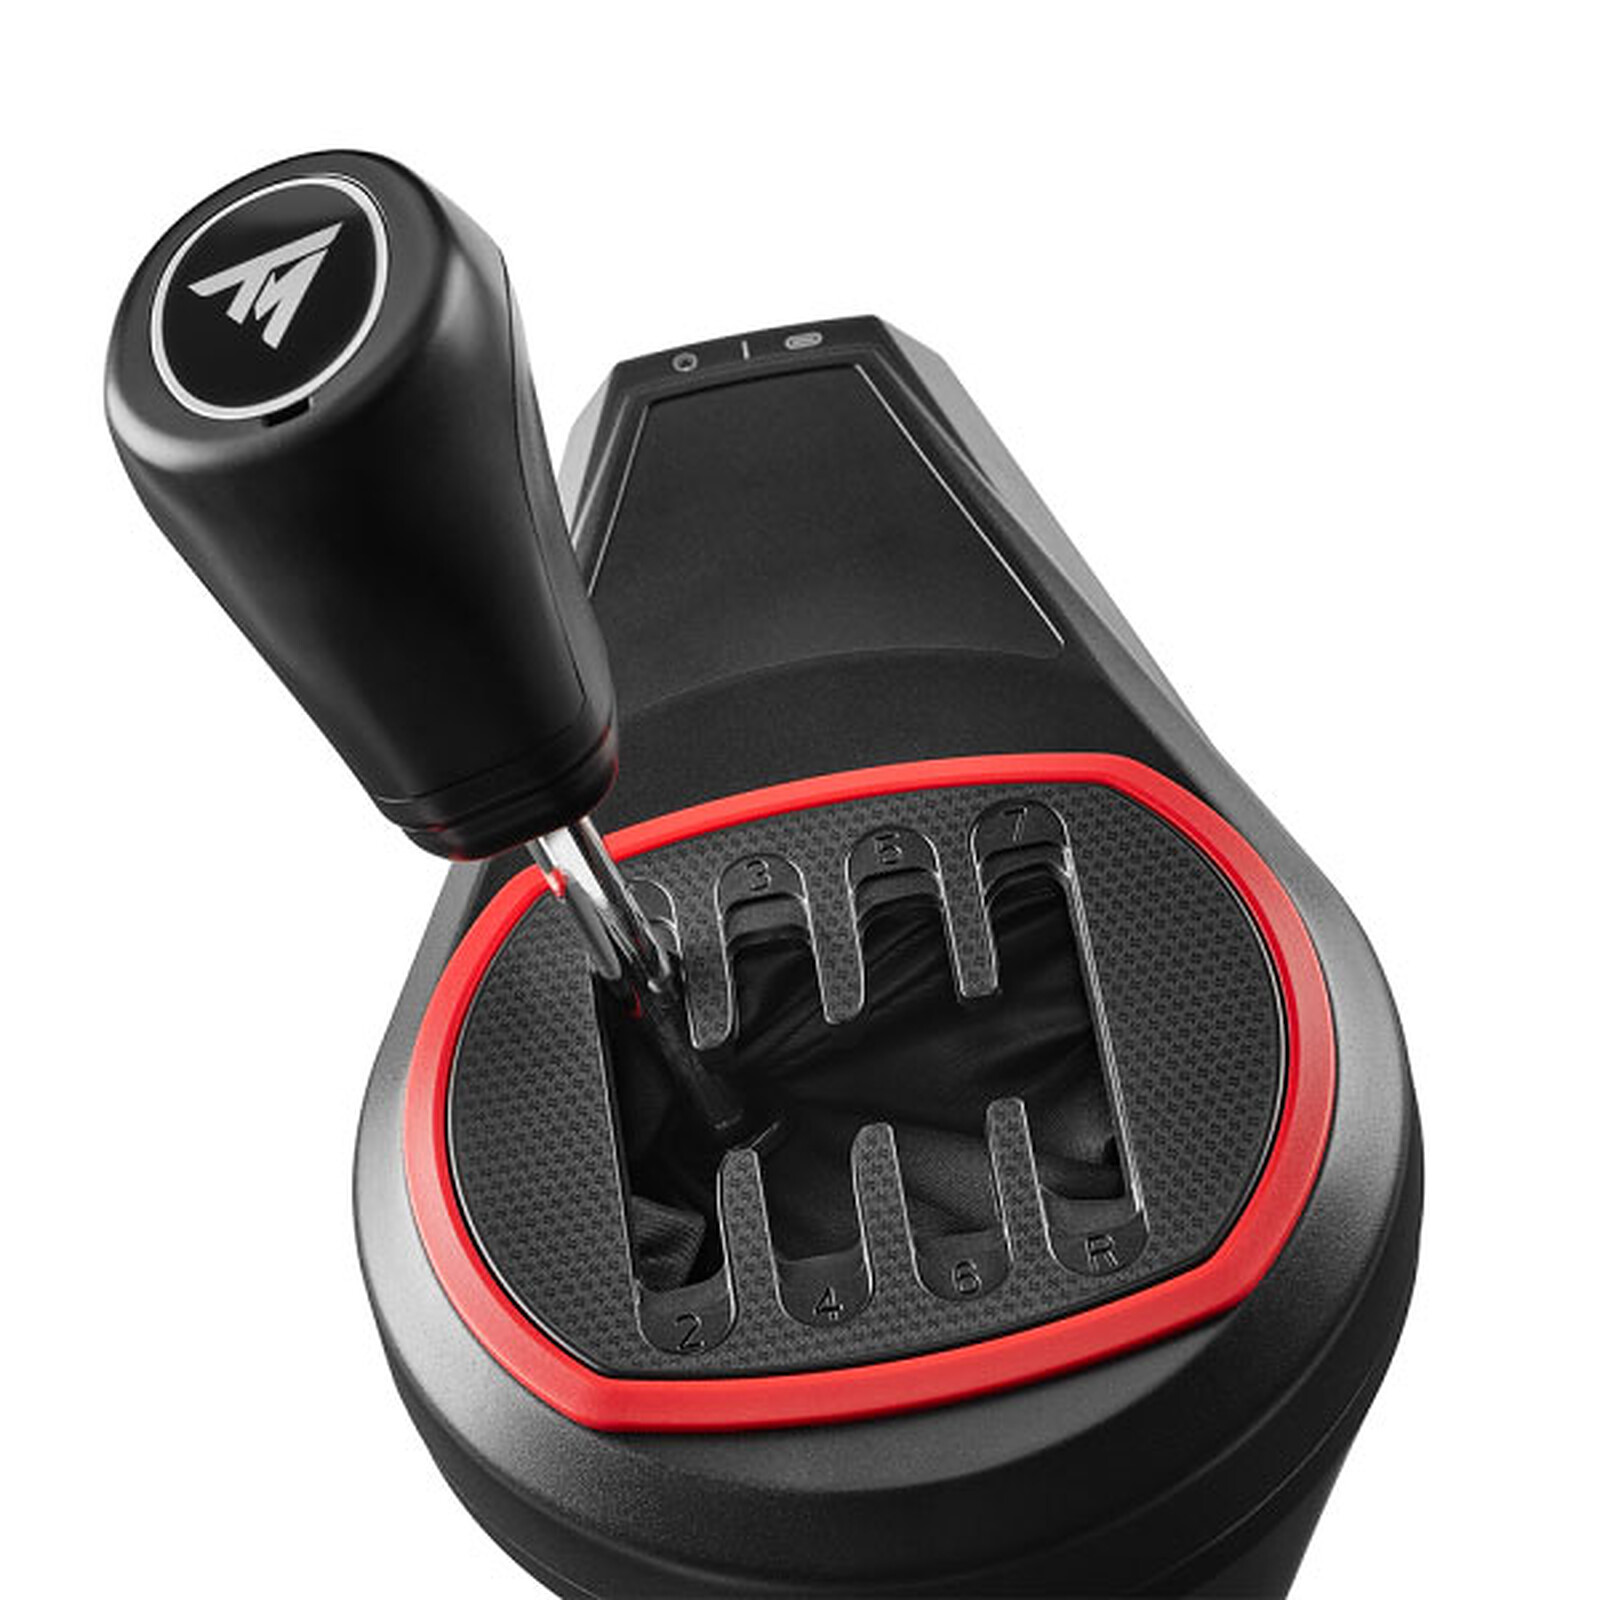 Thrustmaster TH8S Shifter Add-On - PC game racing wheel - LDLC 3